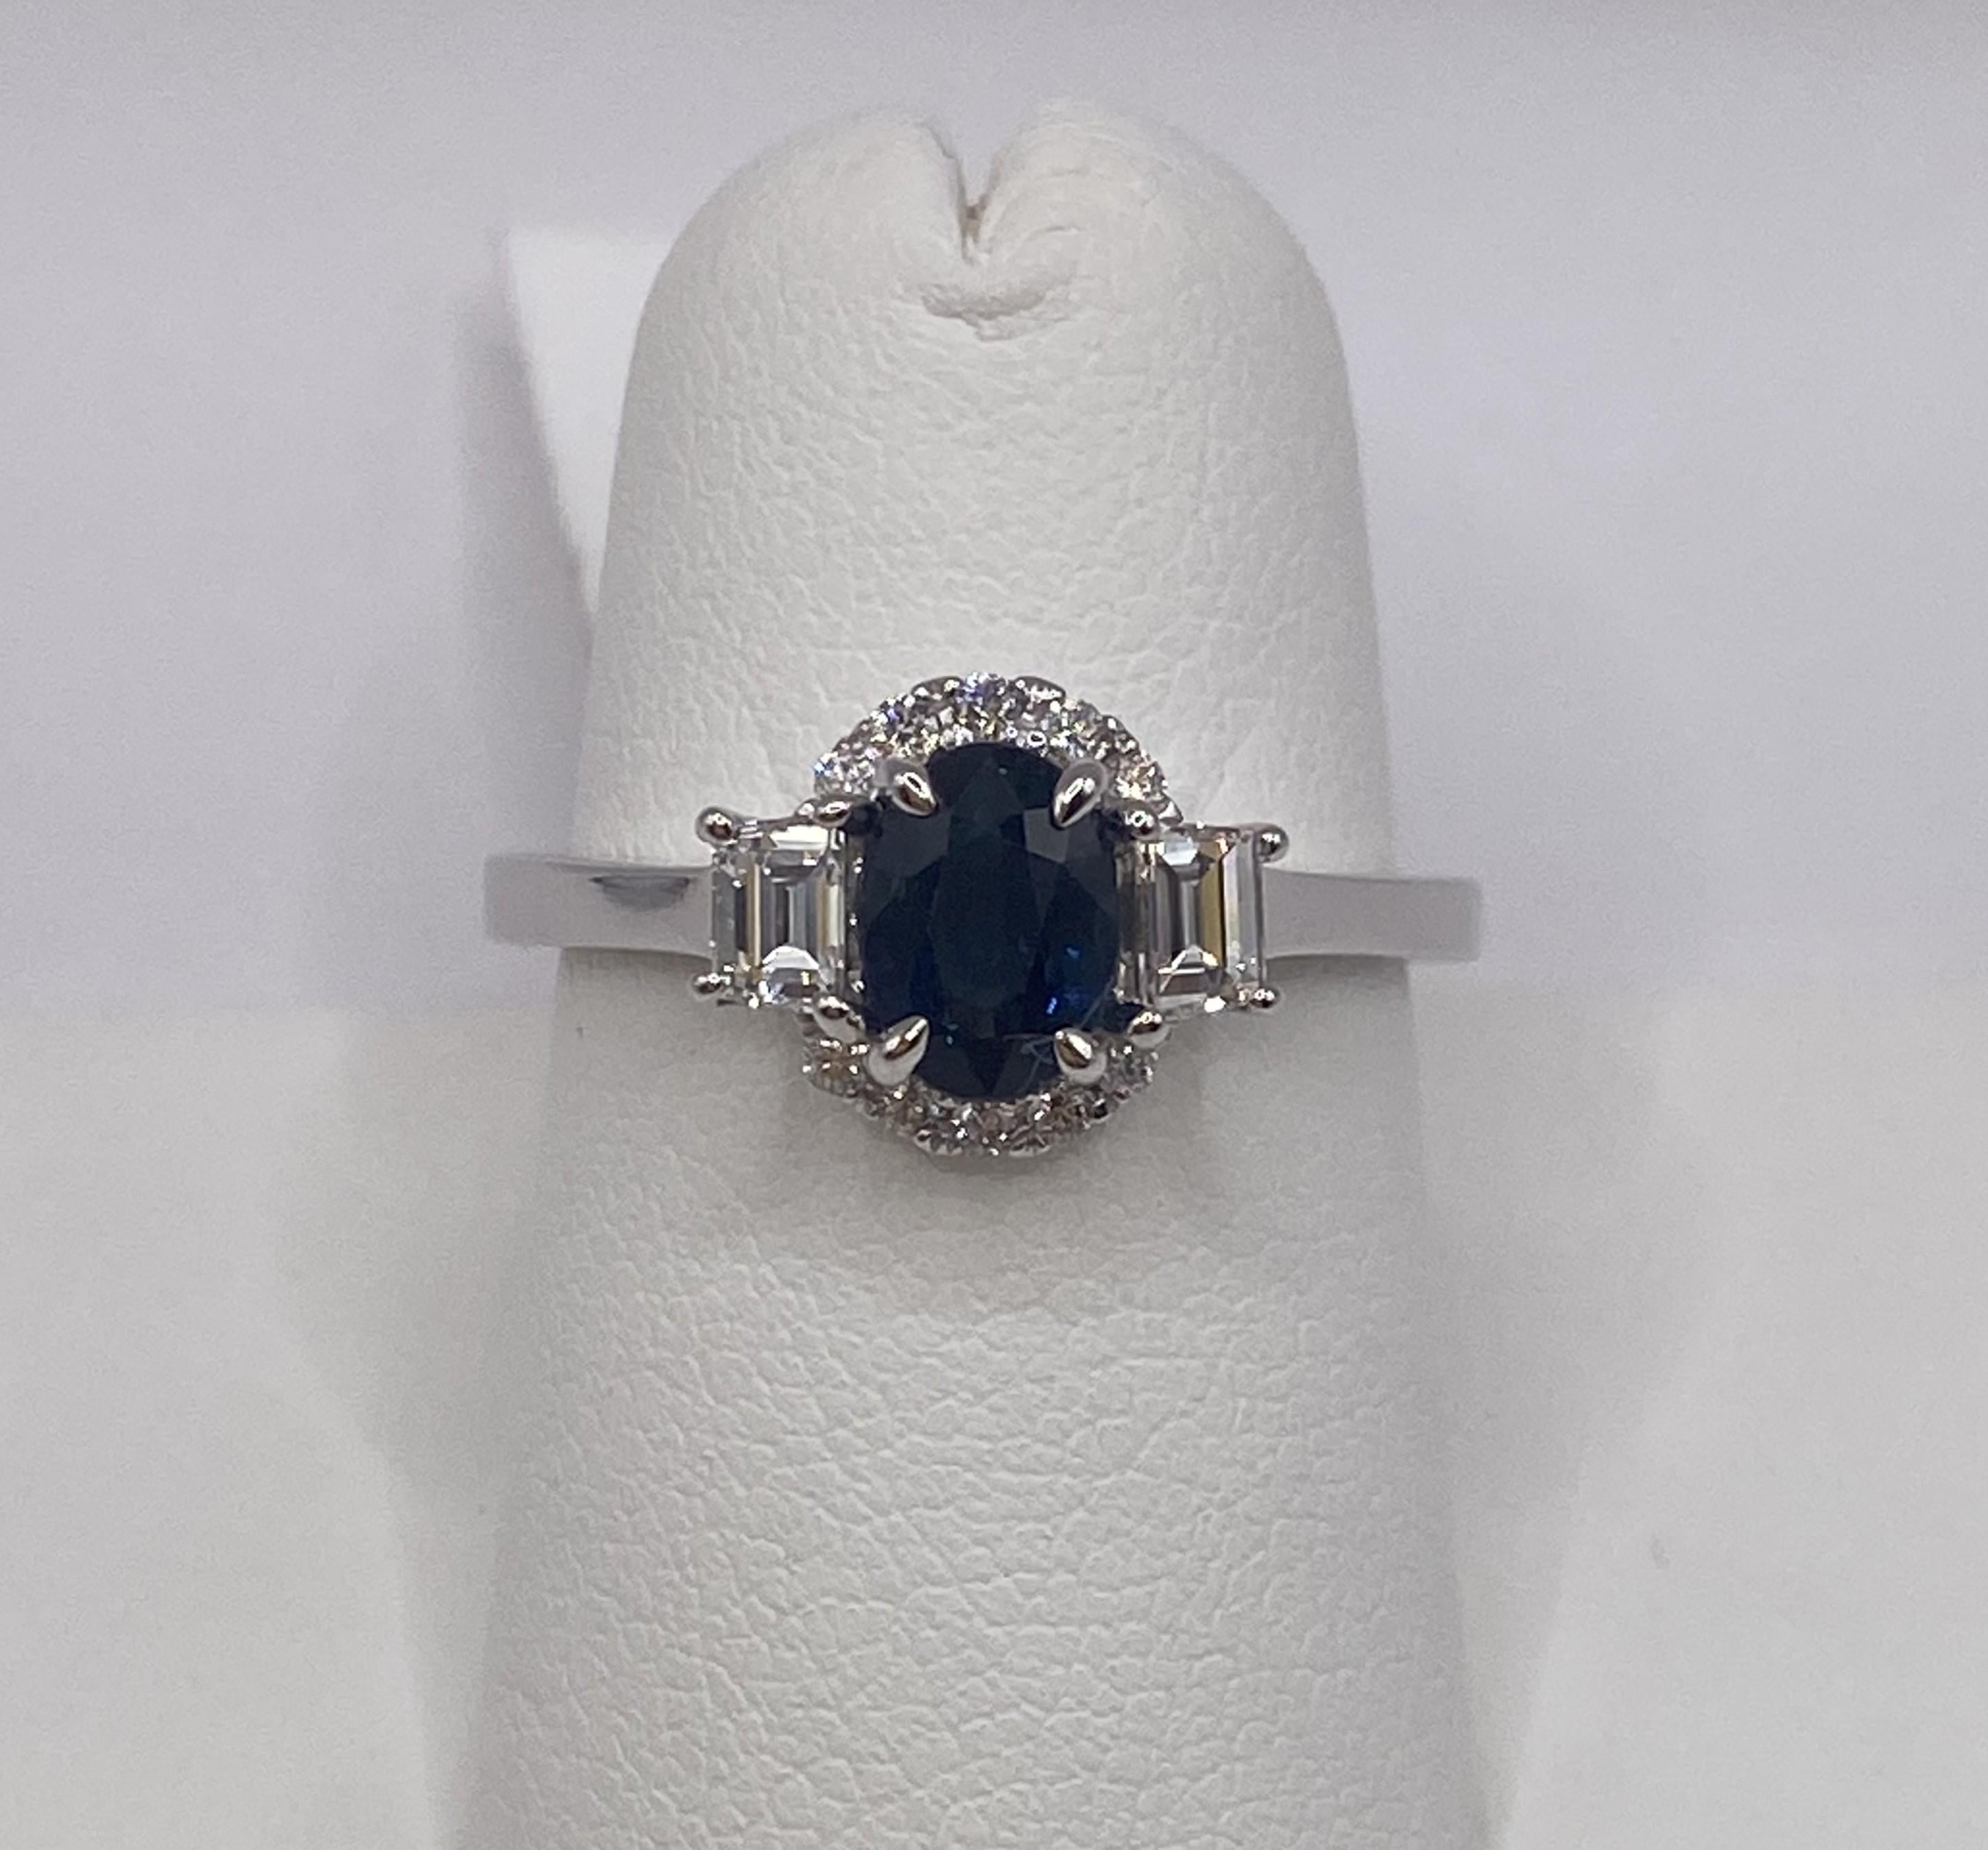 Metal: 18KT White Gold
Finger Size: 6.5
Total Carat Weight: 1.43ctw
(Ring is size 6.5, but is sizable upon request)

Number of Oval Cut Sapphires: 1
Carat Weight: 1.04ctw
Stone Size: 6.7 x 4.9mm

Number of Step Cut Trapezoid Diamonds: 2
Carat